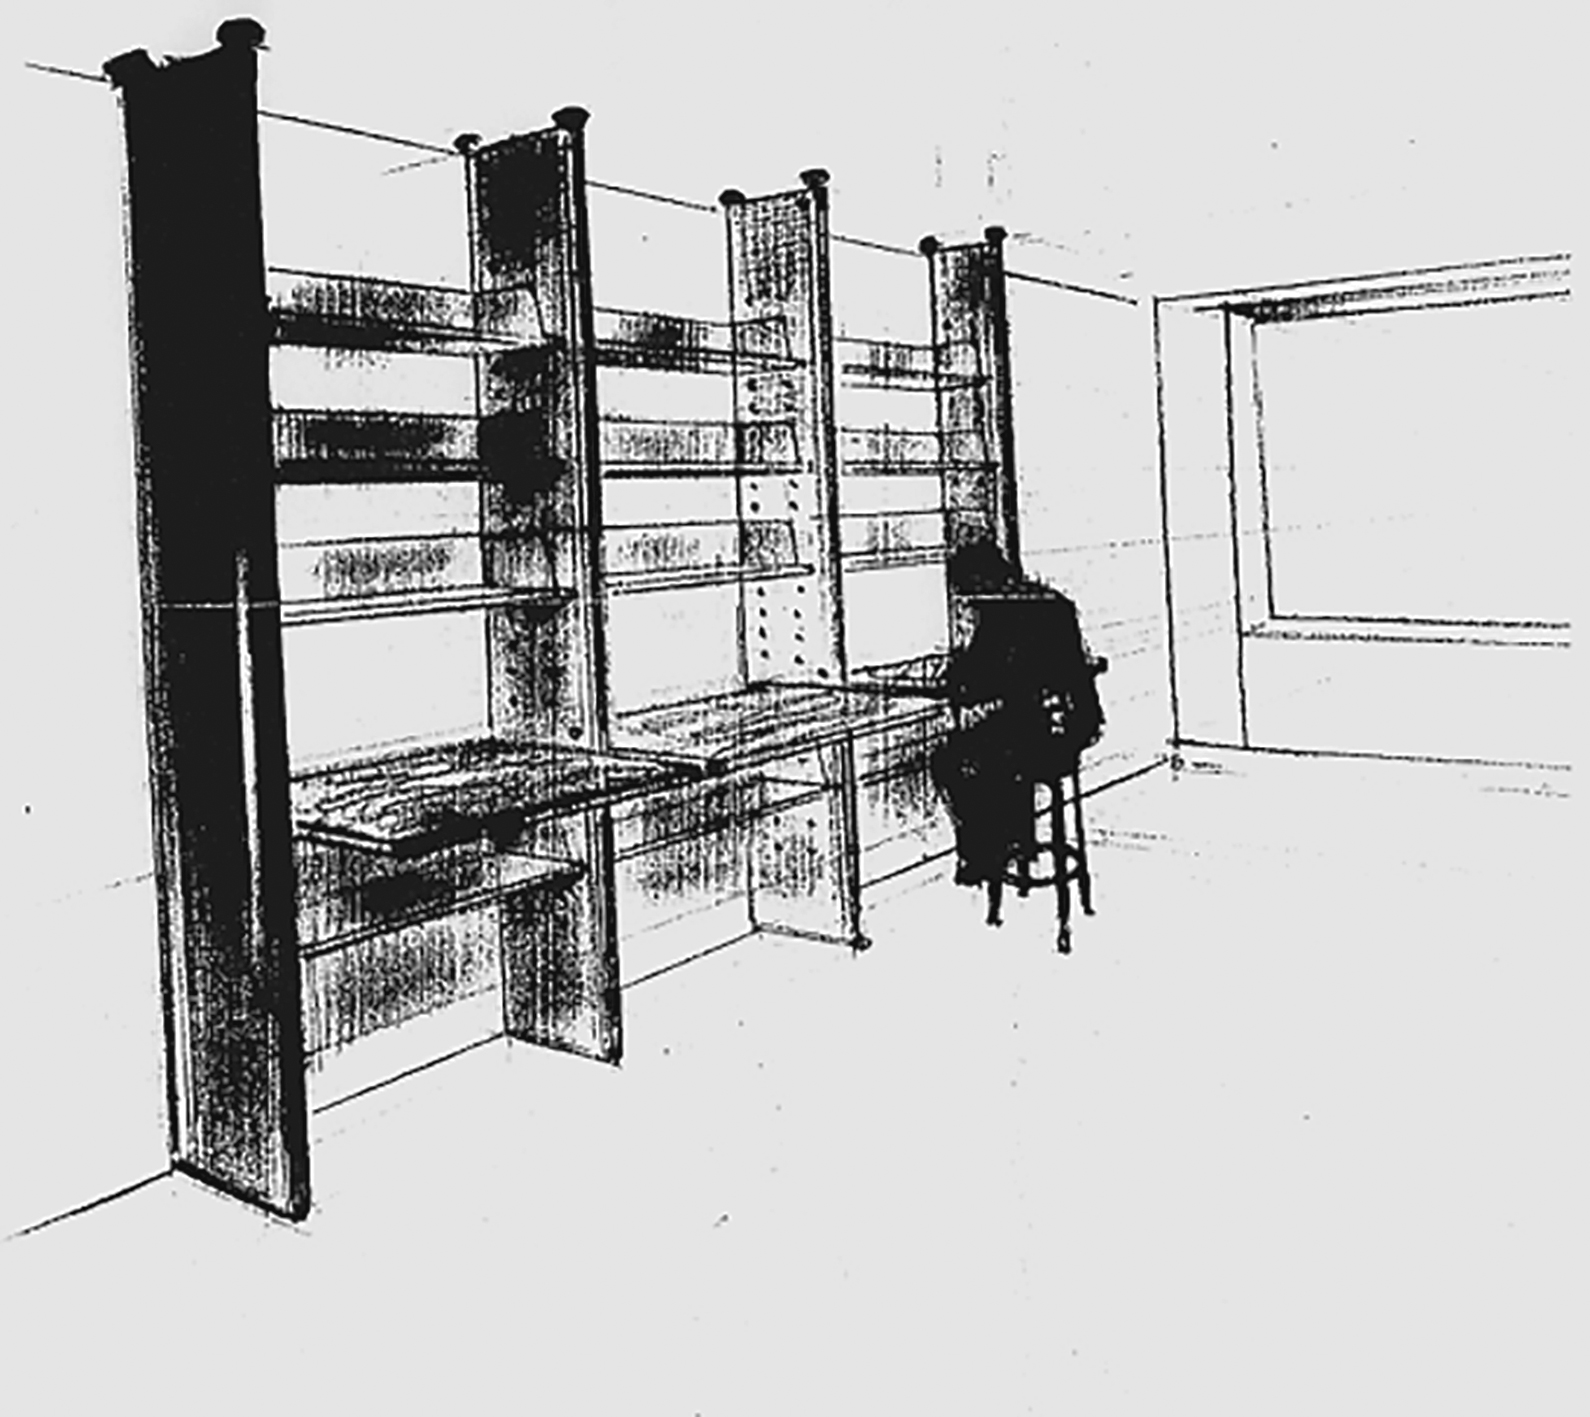 “Wall bookshelves for bookshop”. Ateliers Jean Prouvé drawing no. 13.141, 26 January 1951, by A. Le Stang. Special bookcase in bent sheet metal with rack-and-pinion posts mounted on jacks. Unacheived project.